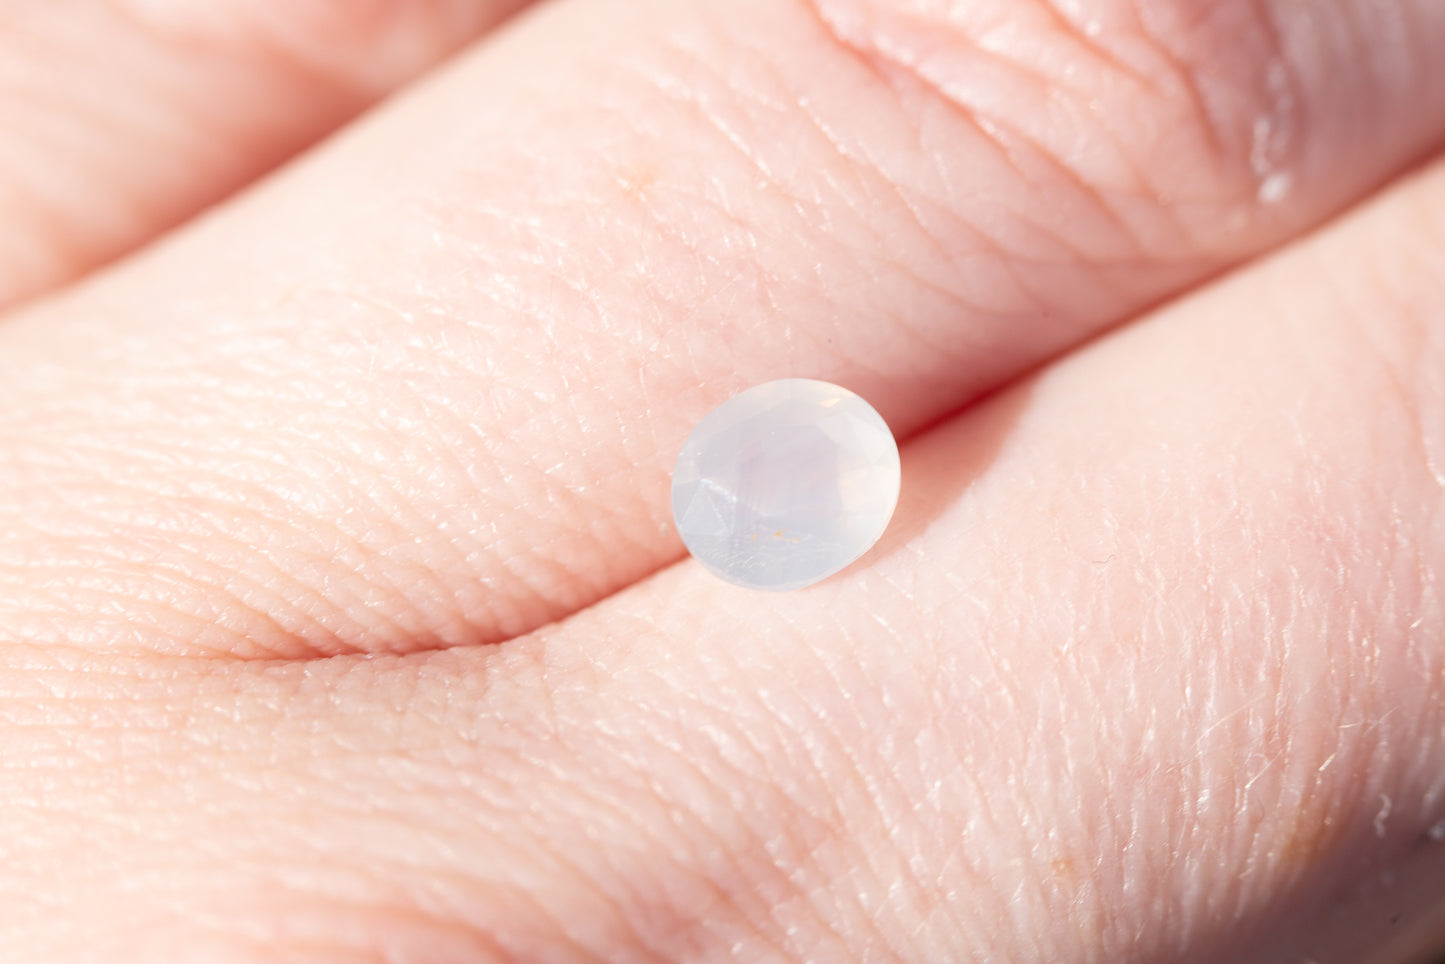 1.25ct oval opalescent white/opaque white